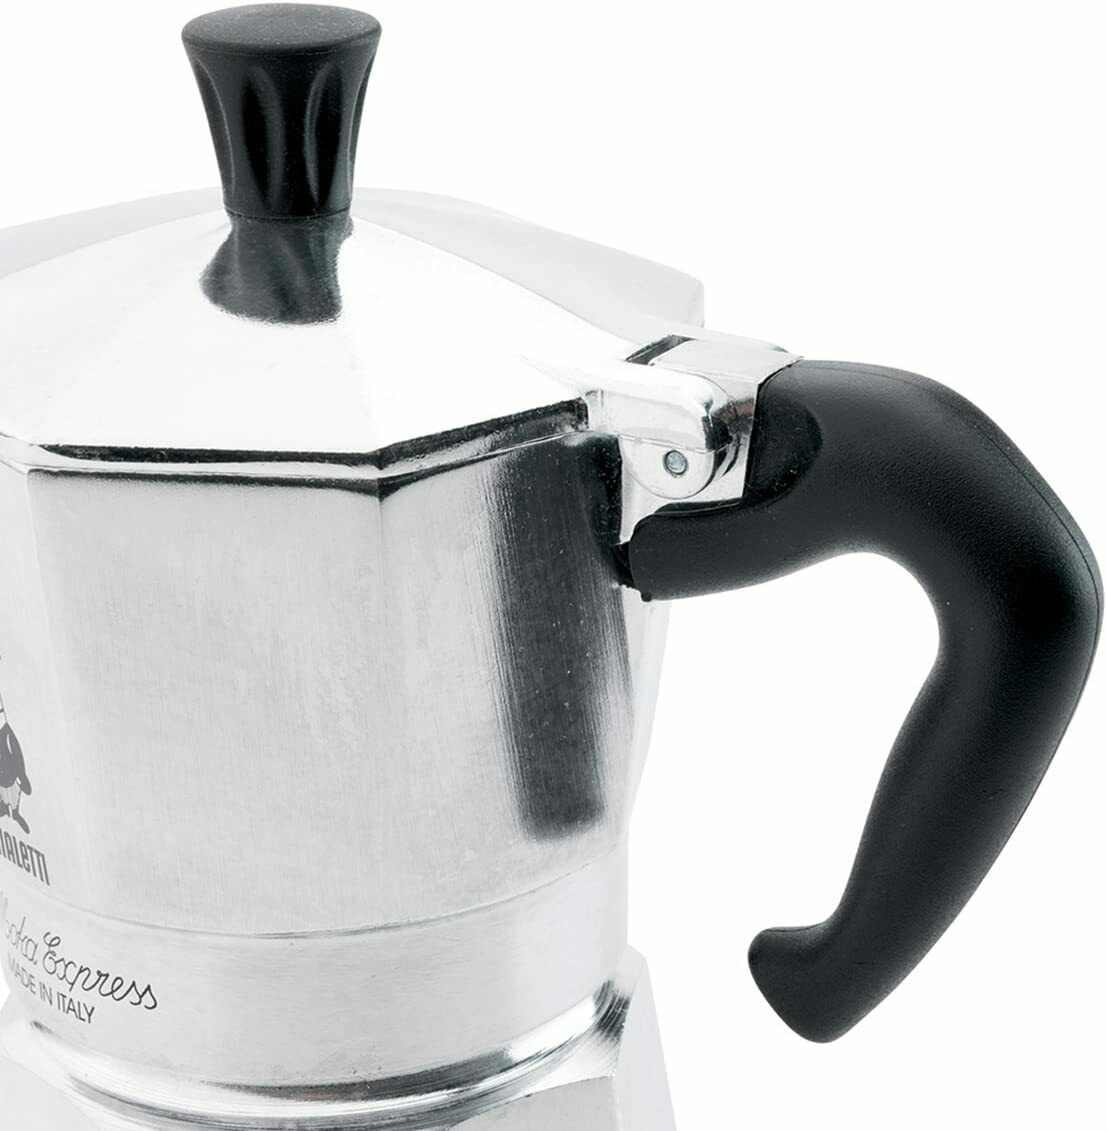 MILANO Stainless/Brushed Steel Stovetop Espresso Maker 6 Cup